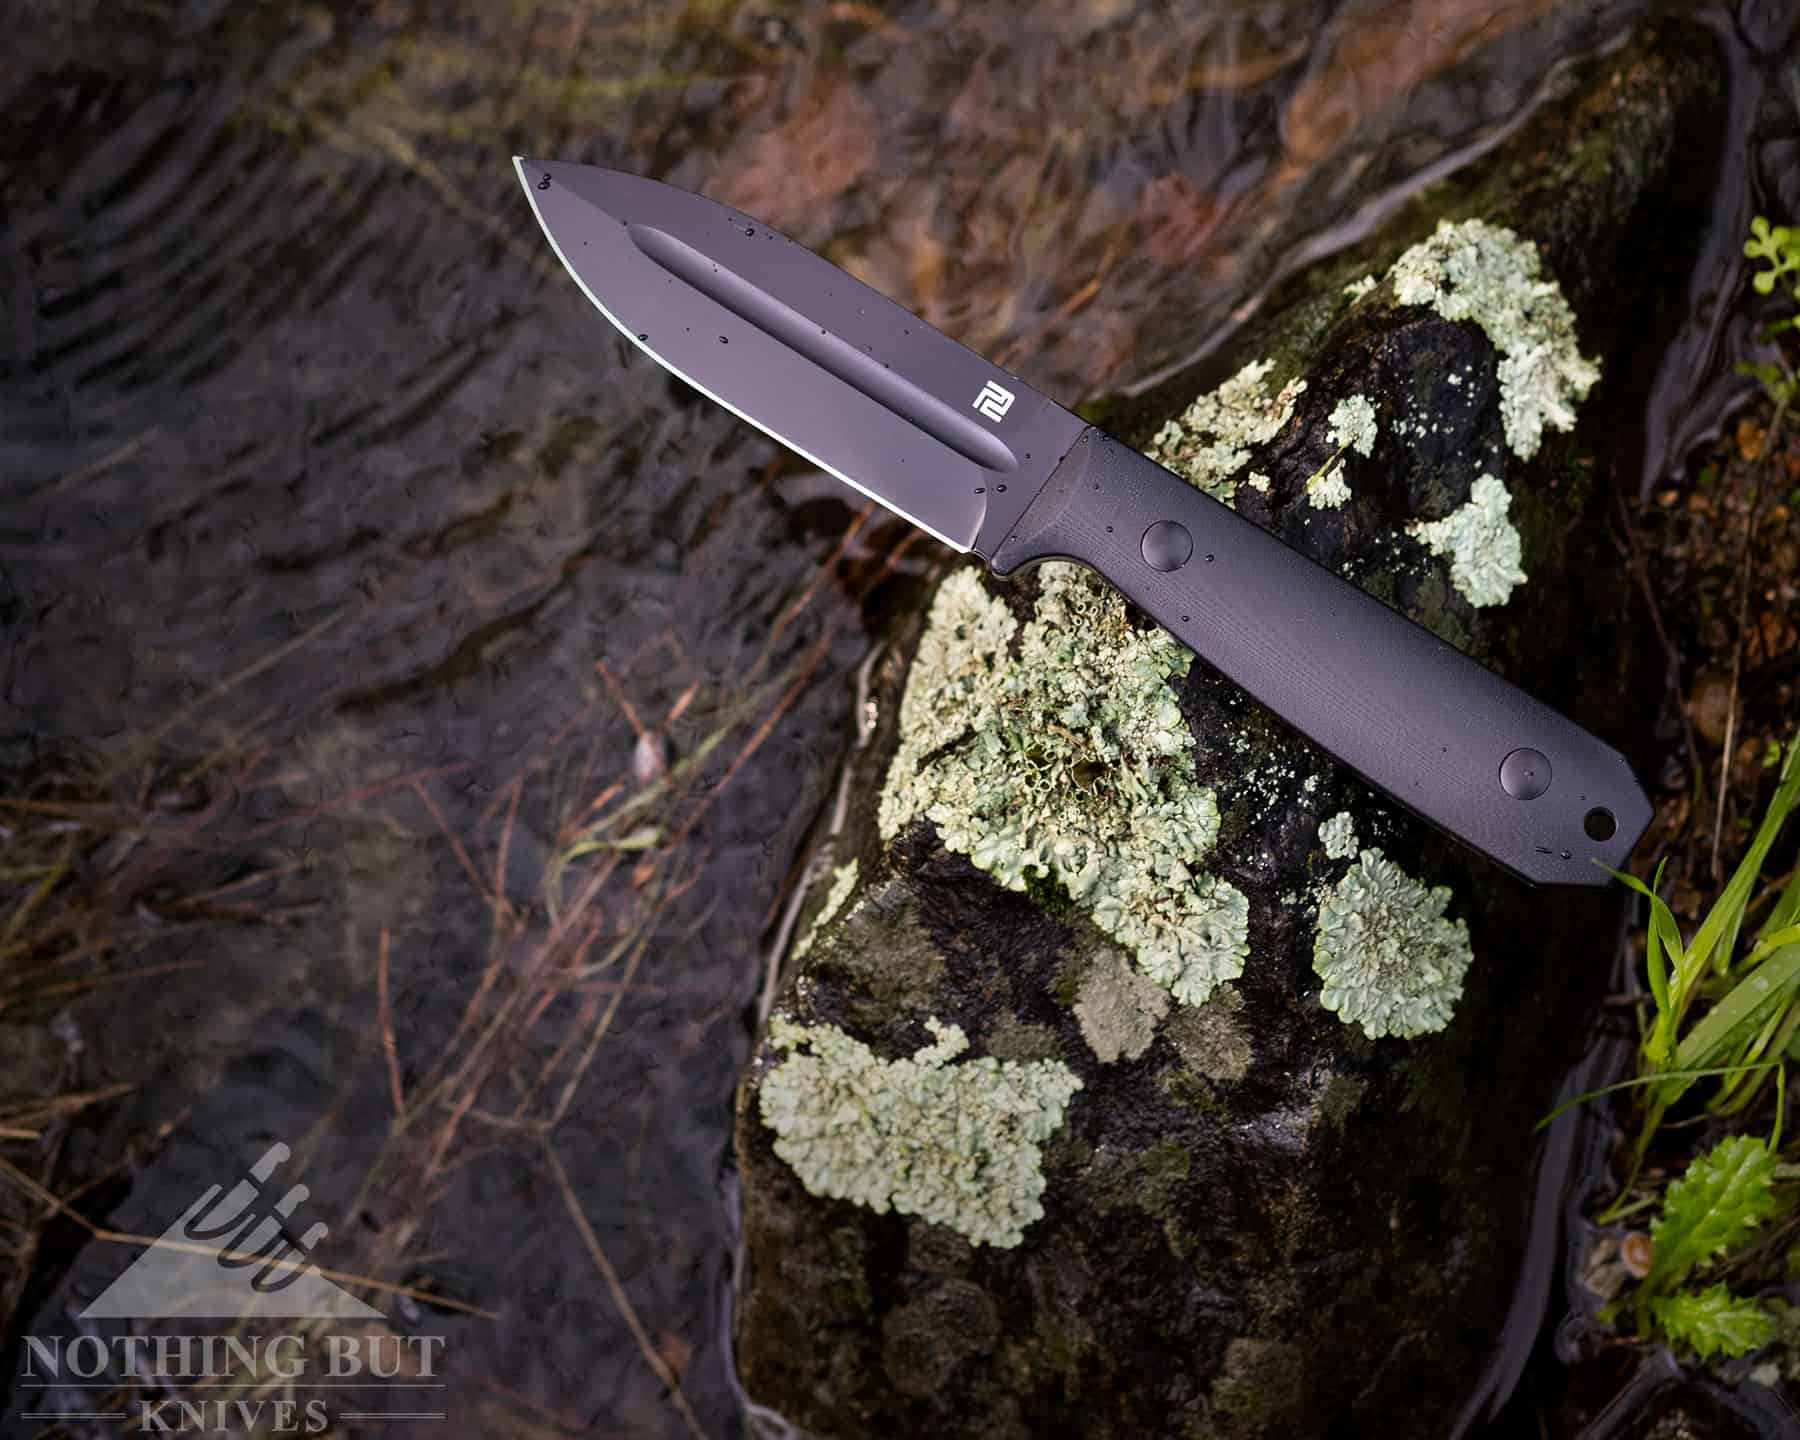 The Wreckhart is a tactical survival knife hybrid. 